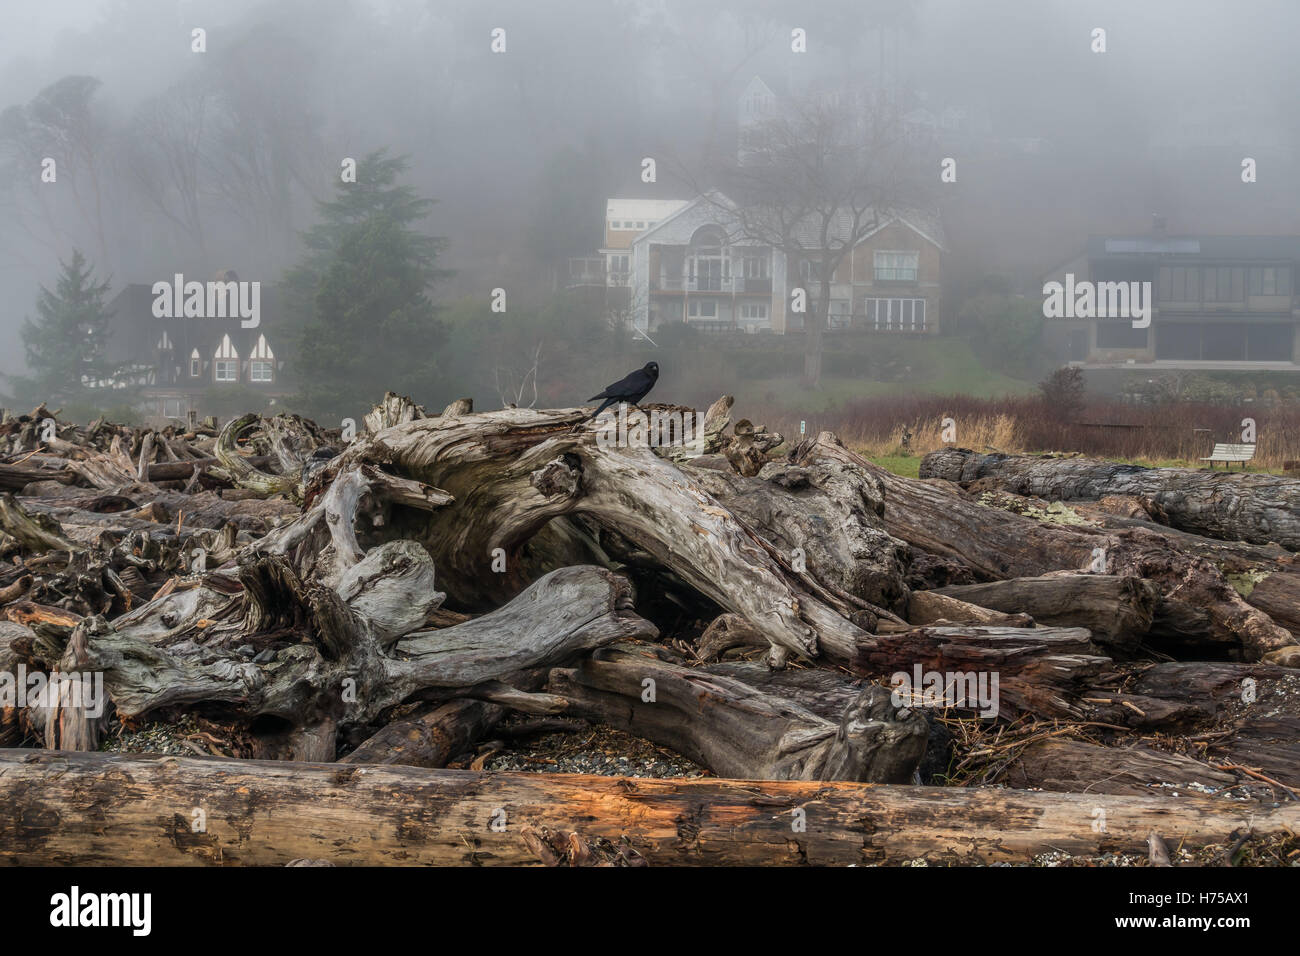 A lone crow sits on a pile of driftwood with fog in the background. Stock Photo